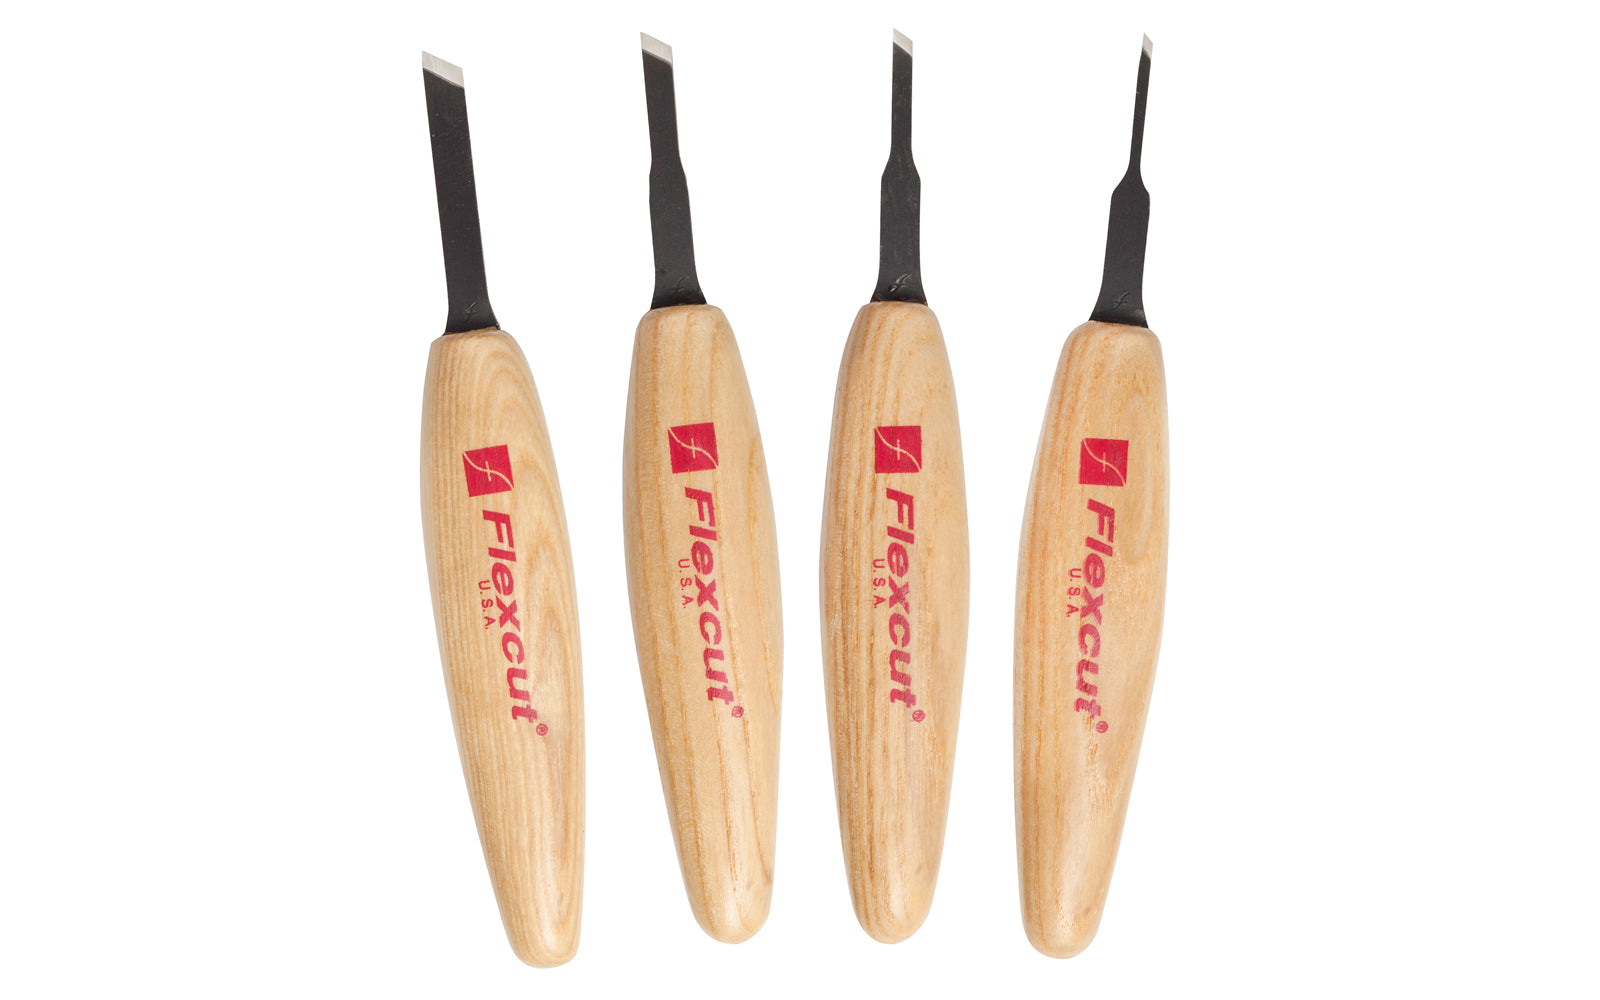 Flexcut Skew Micro Tool Carving Set ~ MT200 - Made in USA ~ 4-piece Set ~ Blades are made of High Carbon Spring Steel, Tempered to HRC 59-61. The cutting edges are hand honed & polished ~ Micro Chisels ~ Set includes 1/16" (1.5mm) - 1/8" (3mm) - 3/16" (5mm) - 1/4" (6mm) Skews - Excellent for miniature & extra fine detail carving work ~ 651646302005